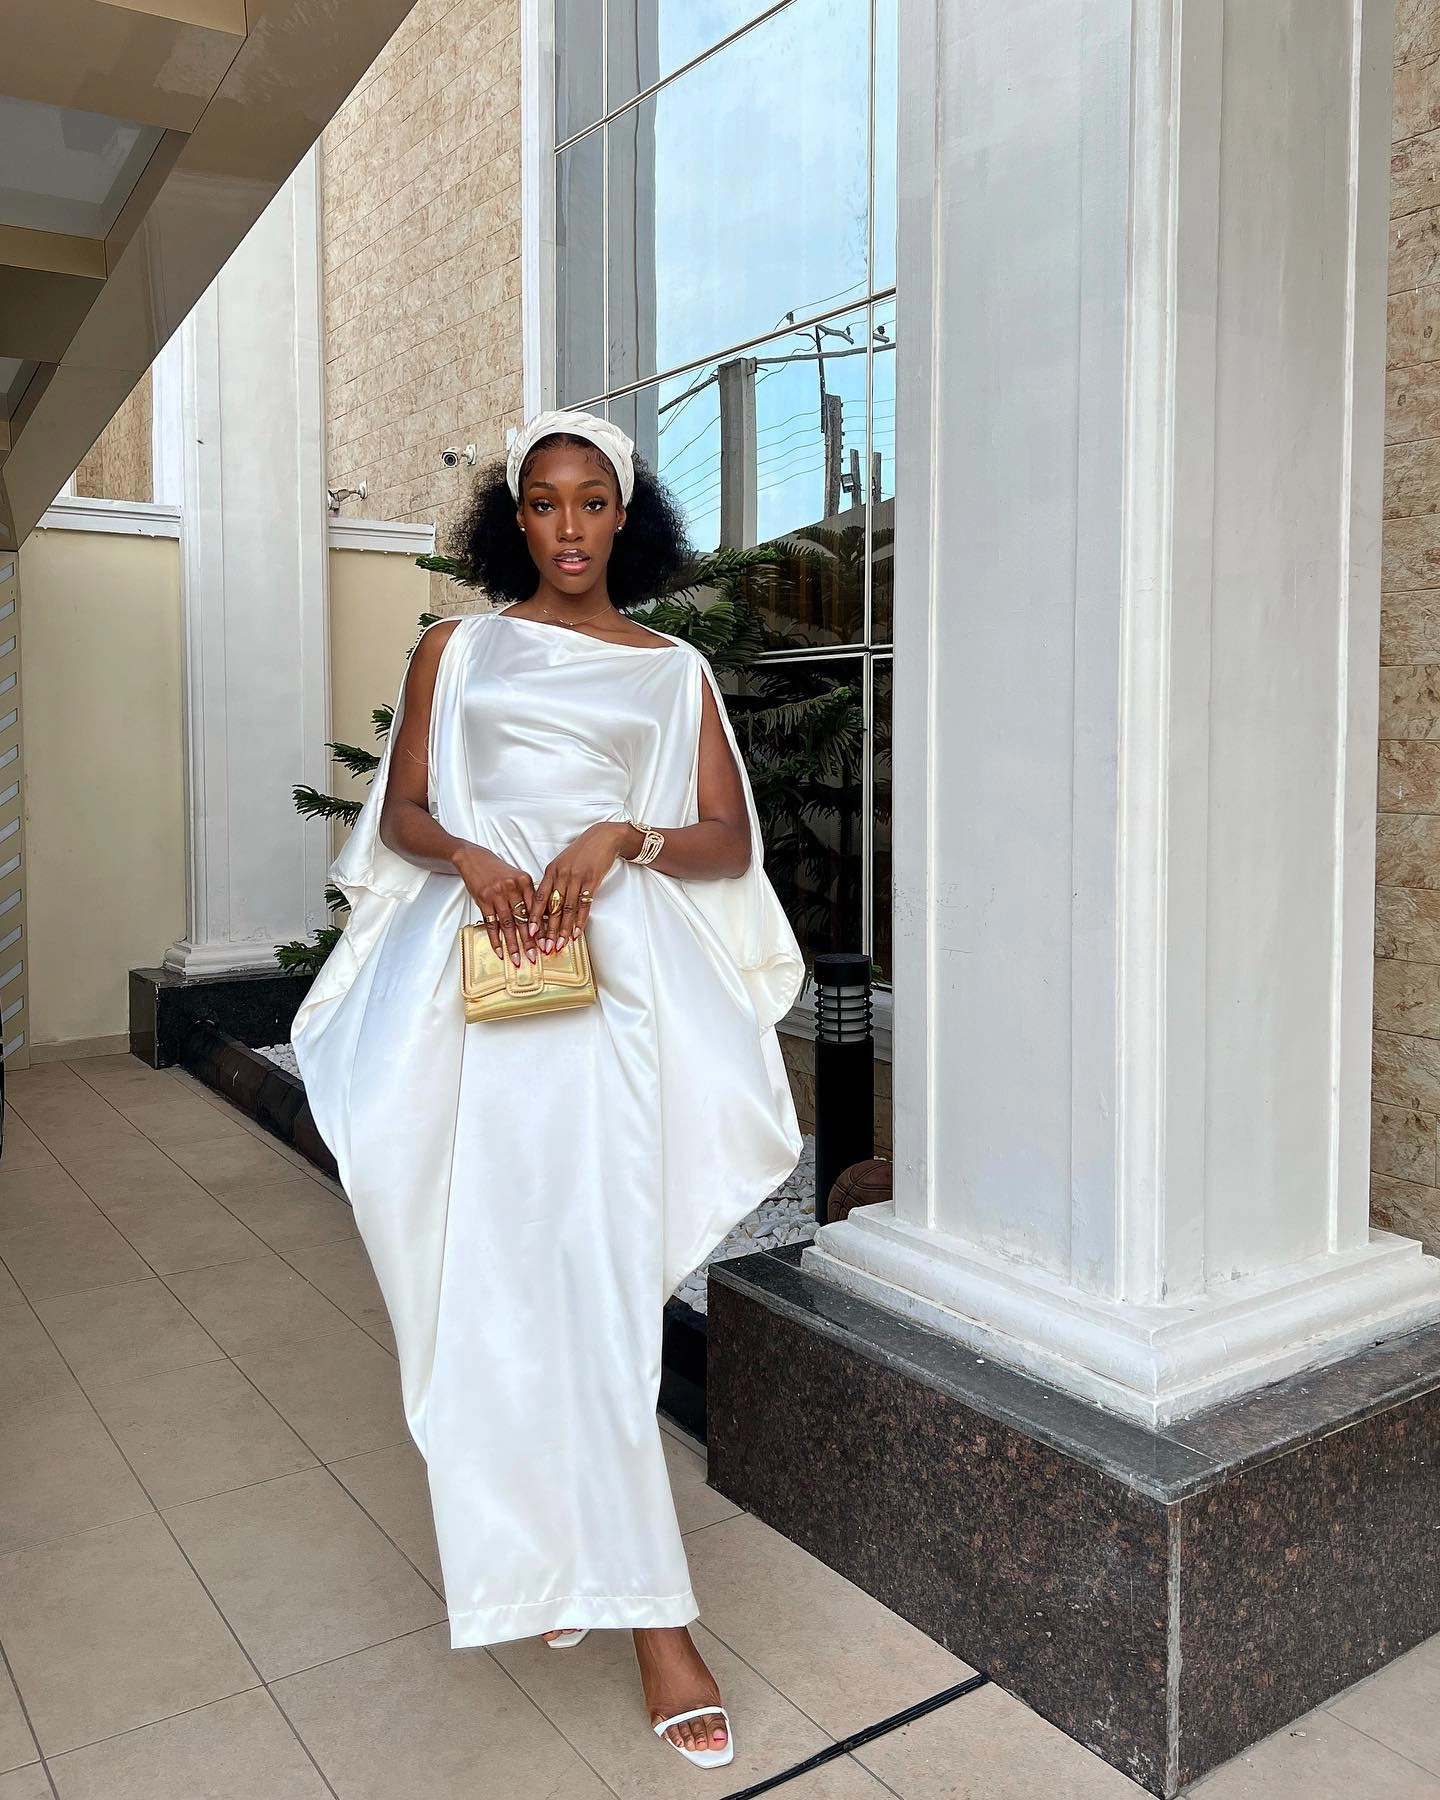 Paul Okoye And His Girlfriend Step Out Together In Matching White Outfits (Photos)